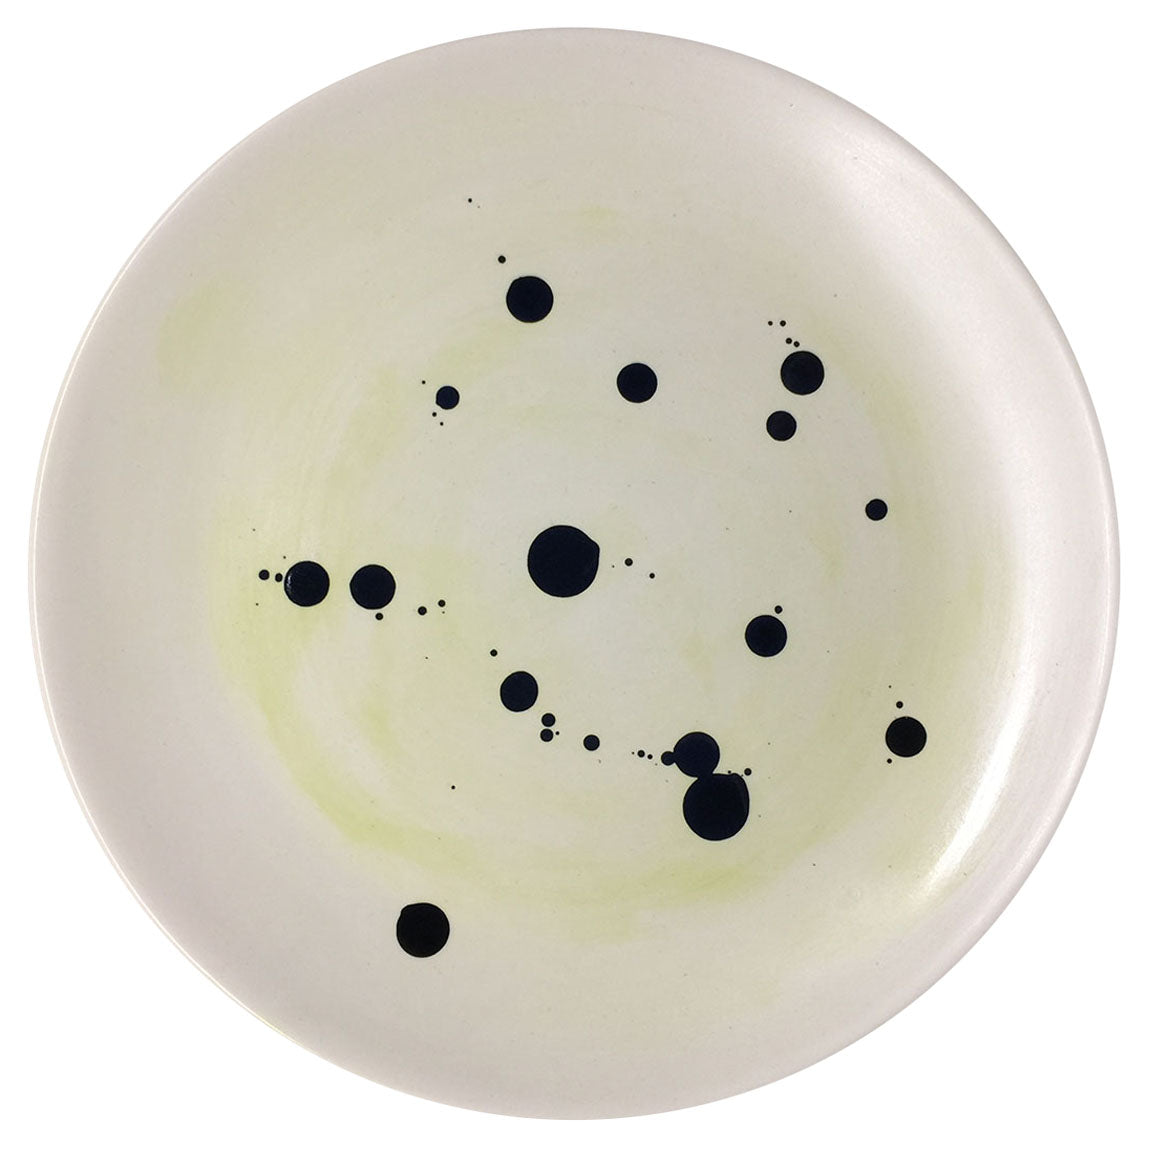 PLATTER #3 - CHARTREUSE- HAND-PAINTED EARTHENWARE